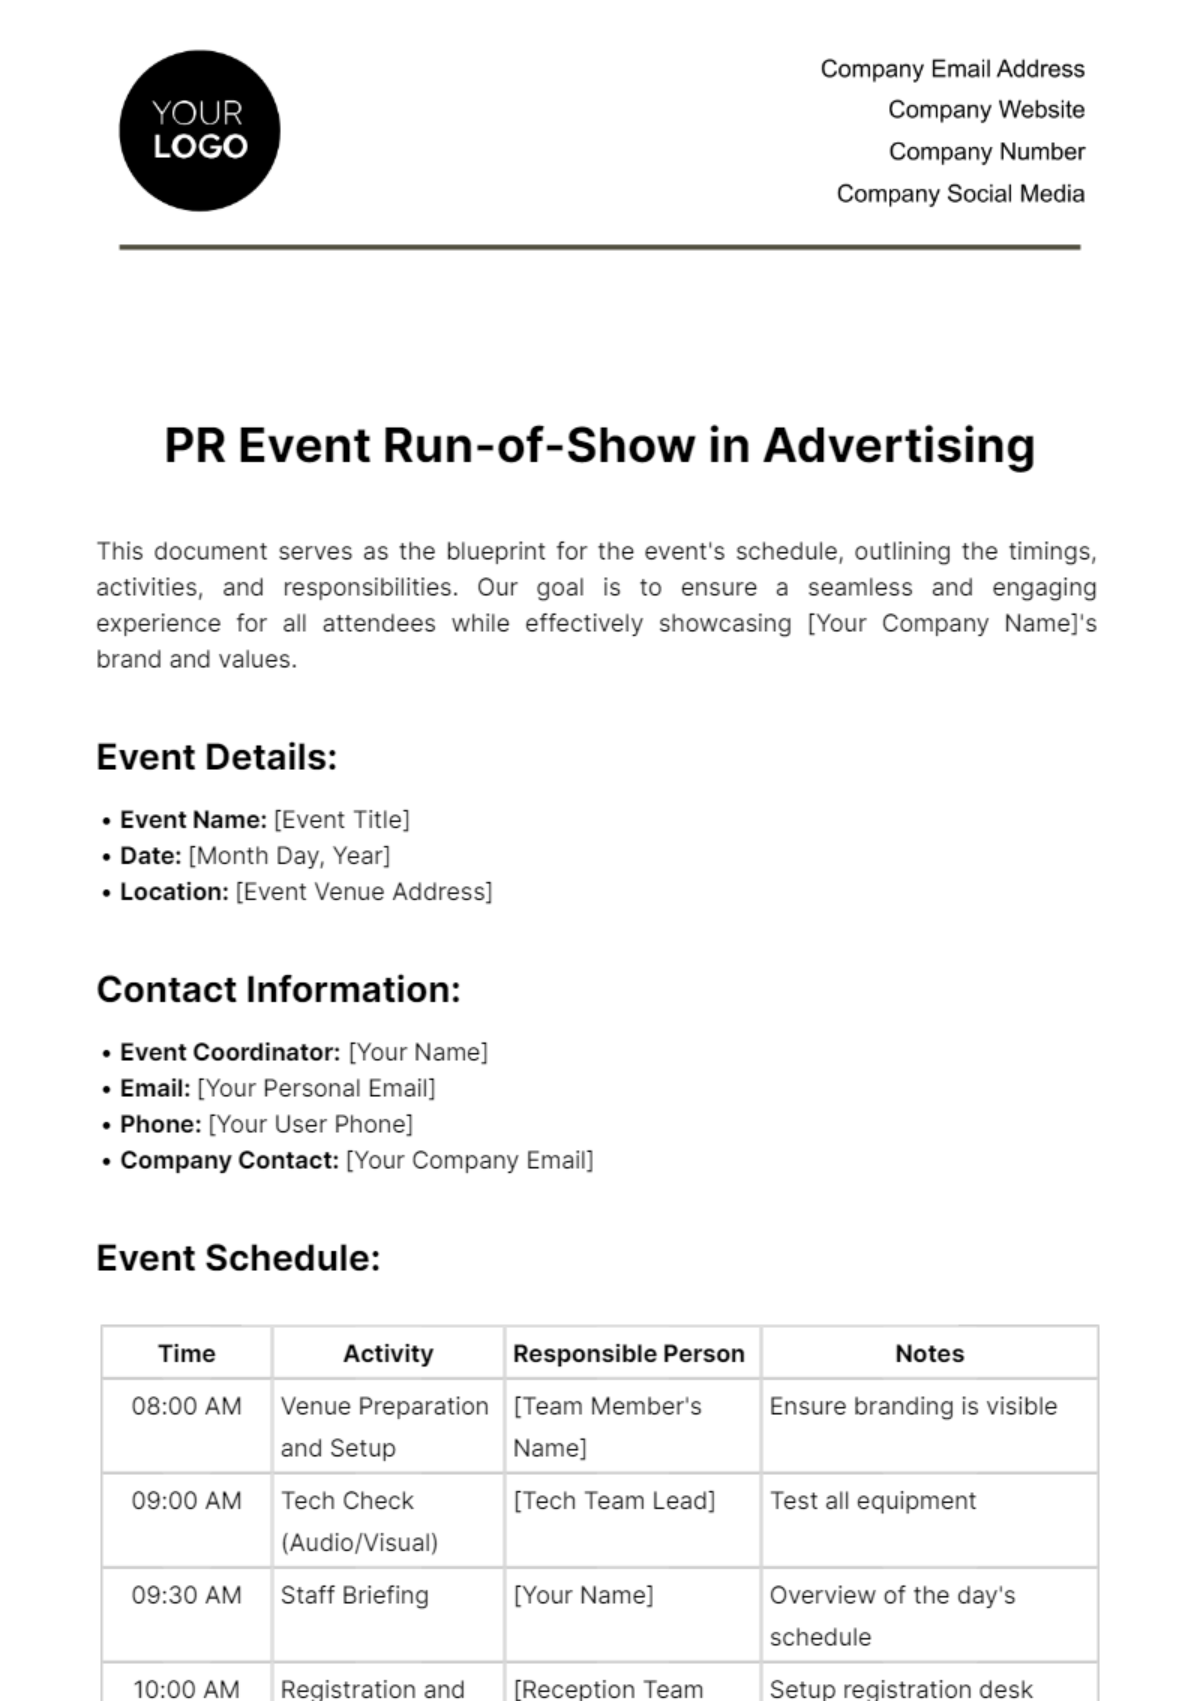 PR Event Run-of-Show in Advertising Template